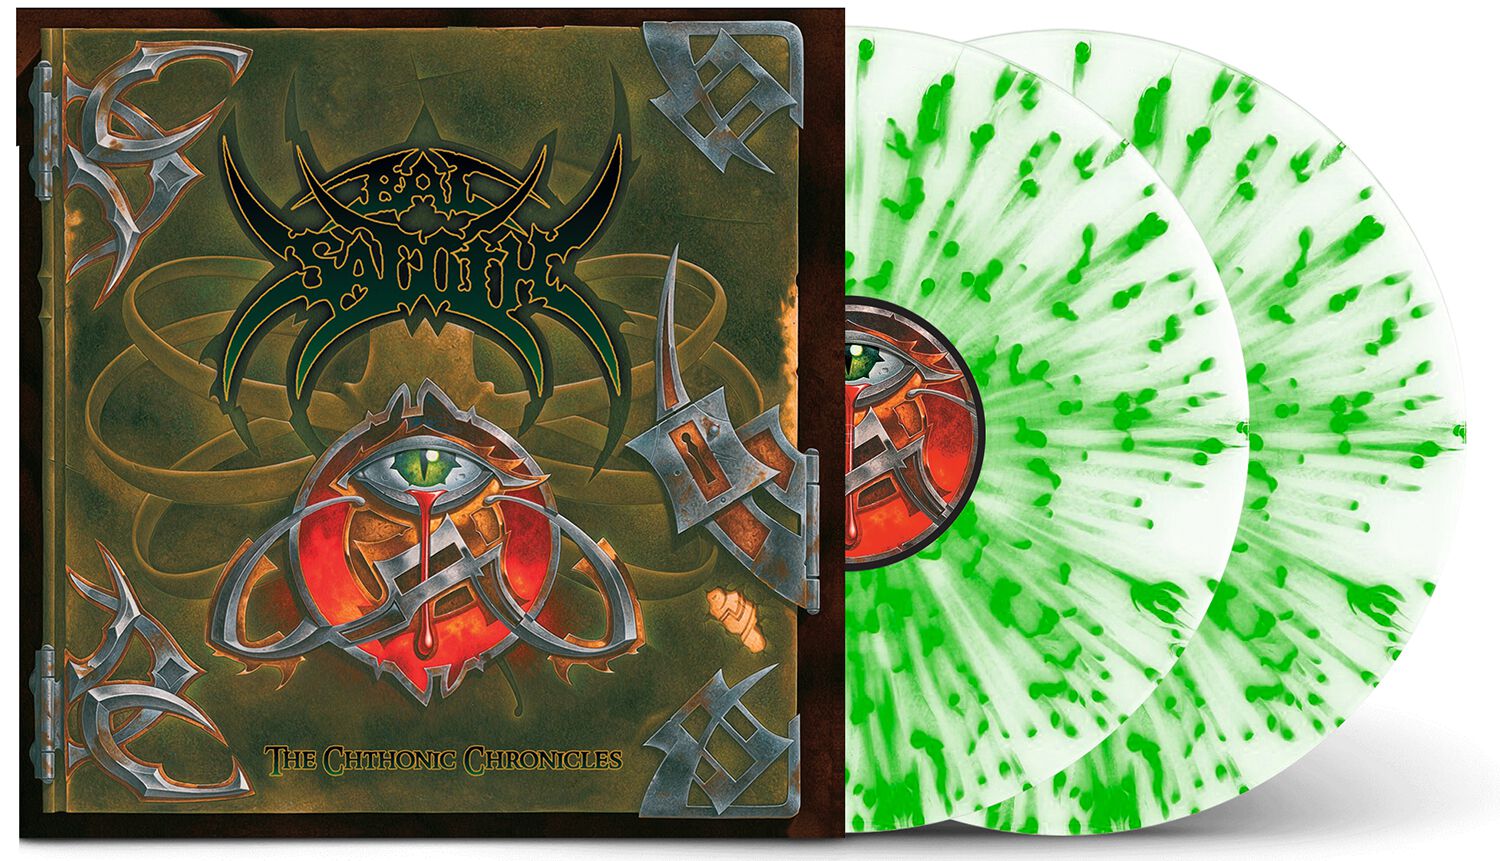 Image of Bal-Sagoth The chthonic chronicles 2-LP splattered